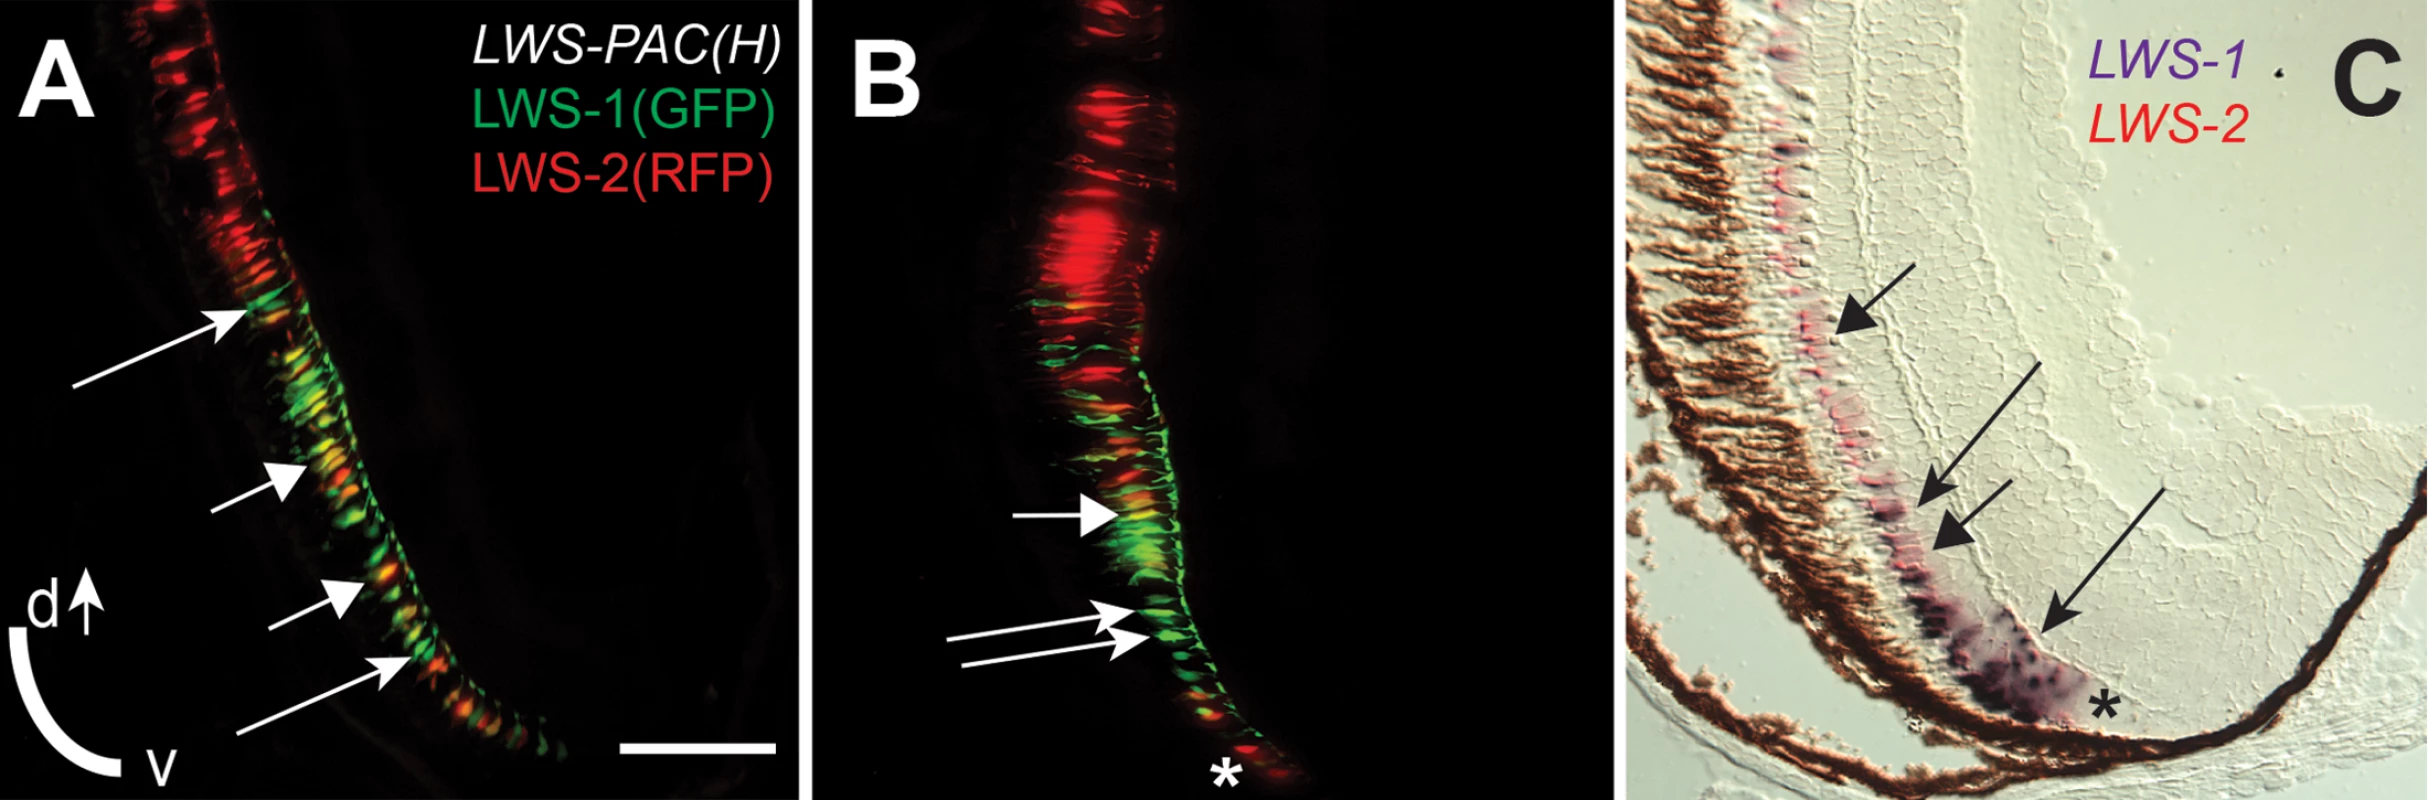 An “LWS Transition Zone” exists in ventral retina of juvenile fish.